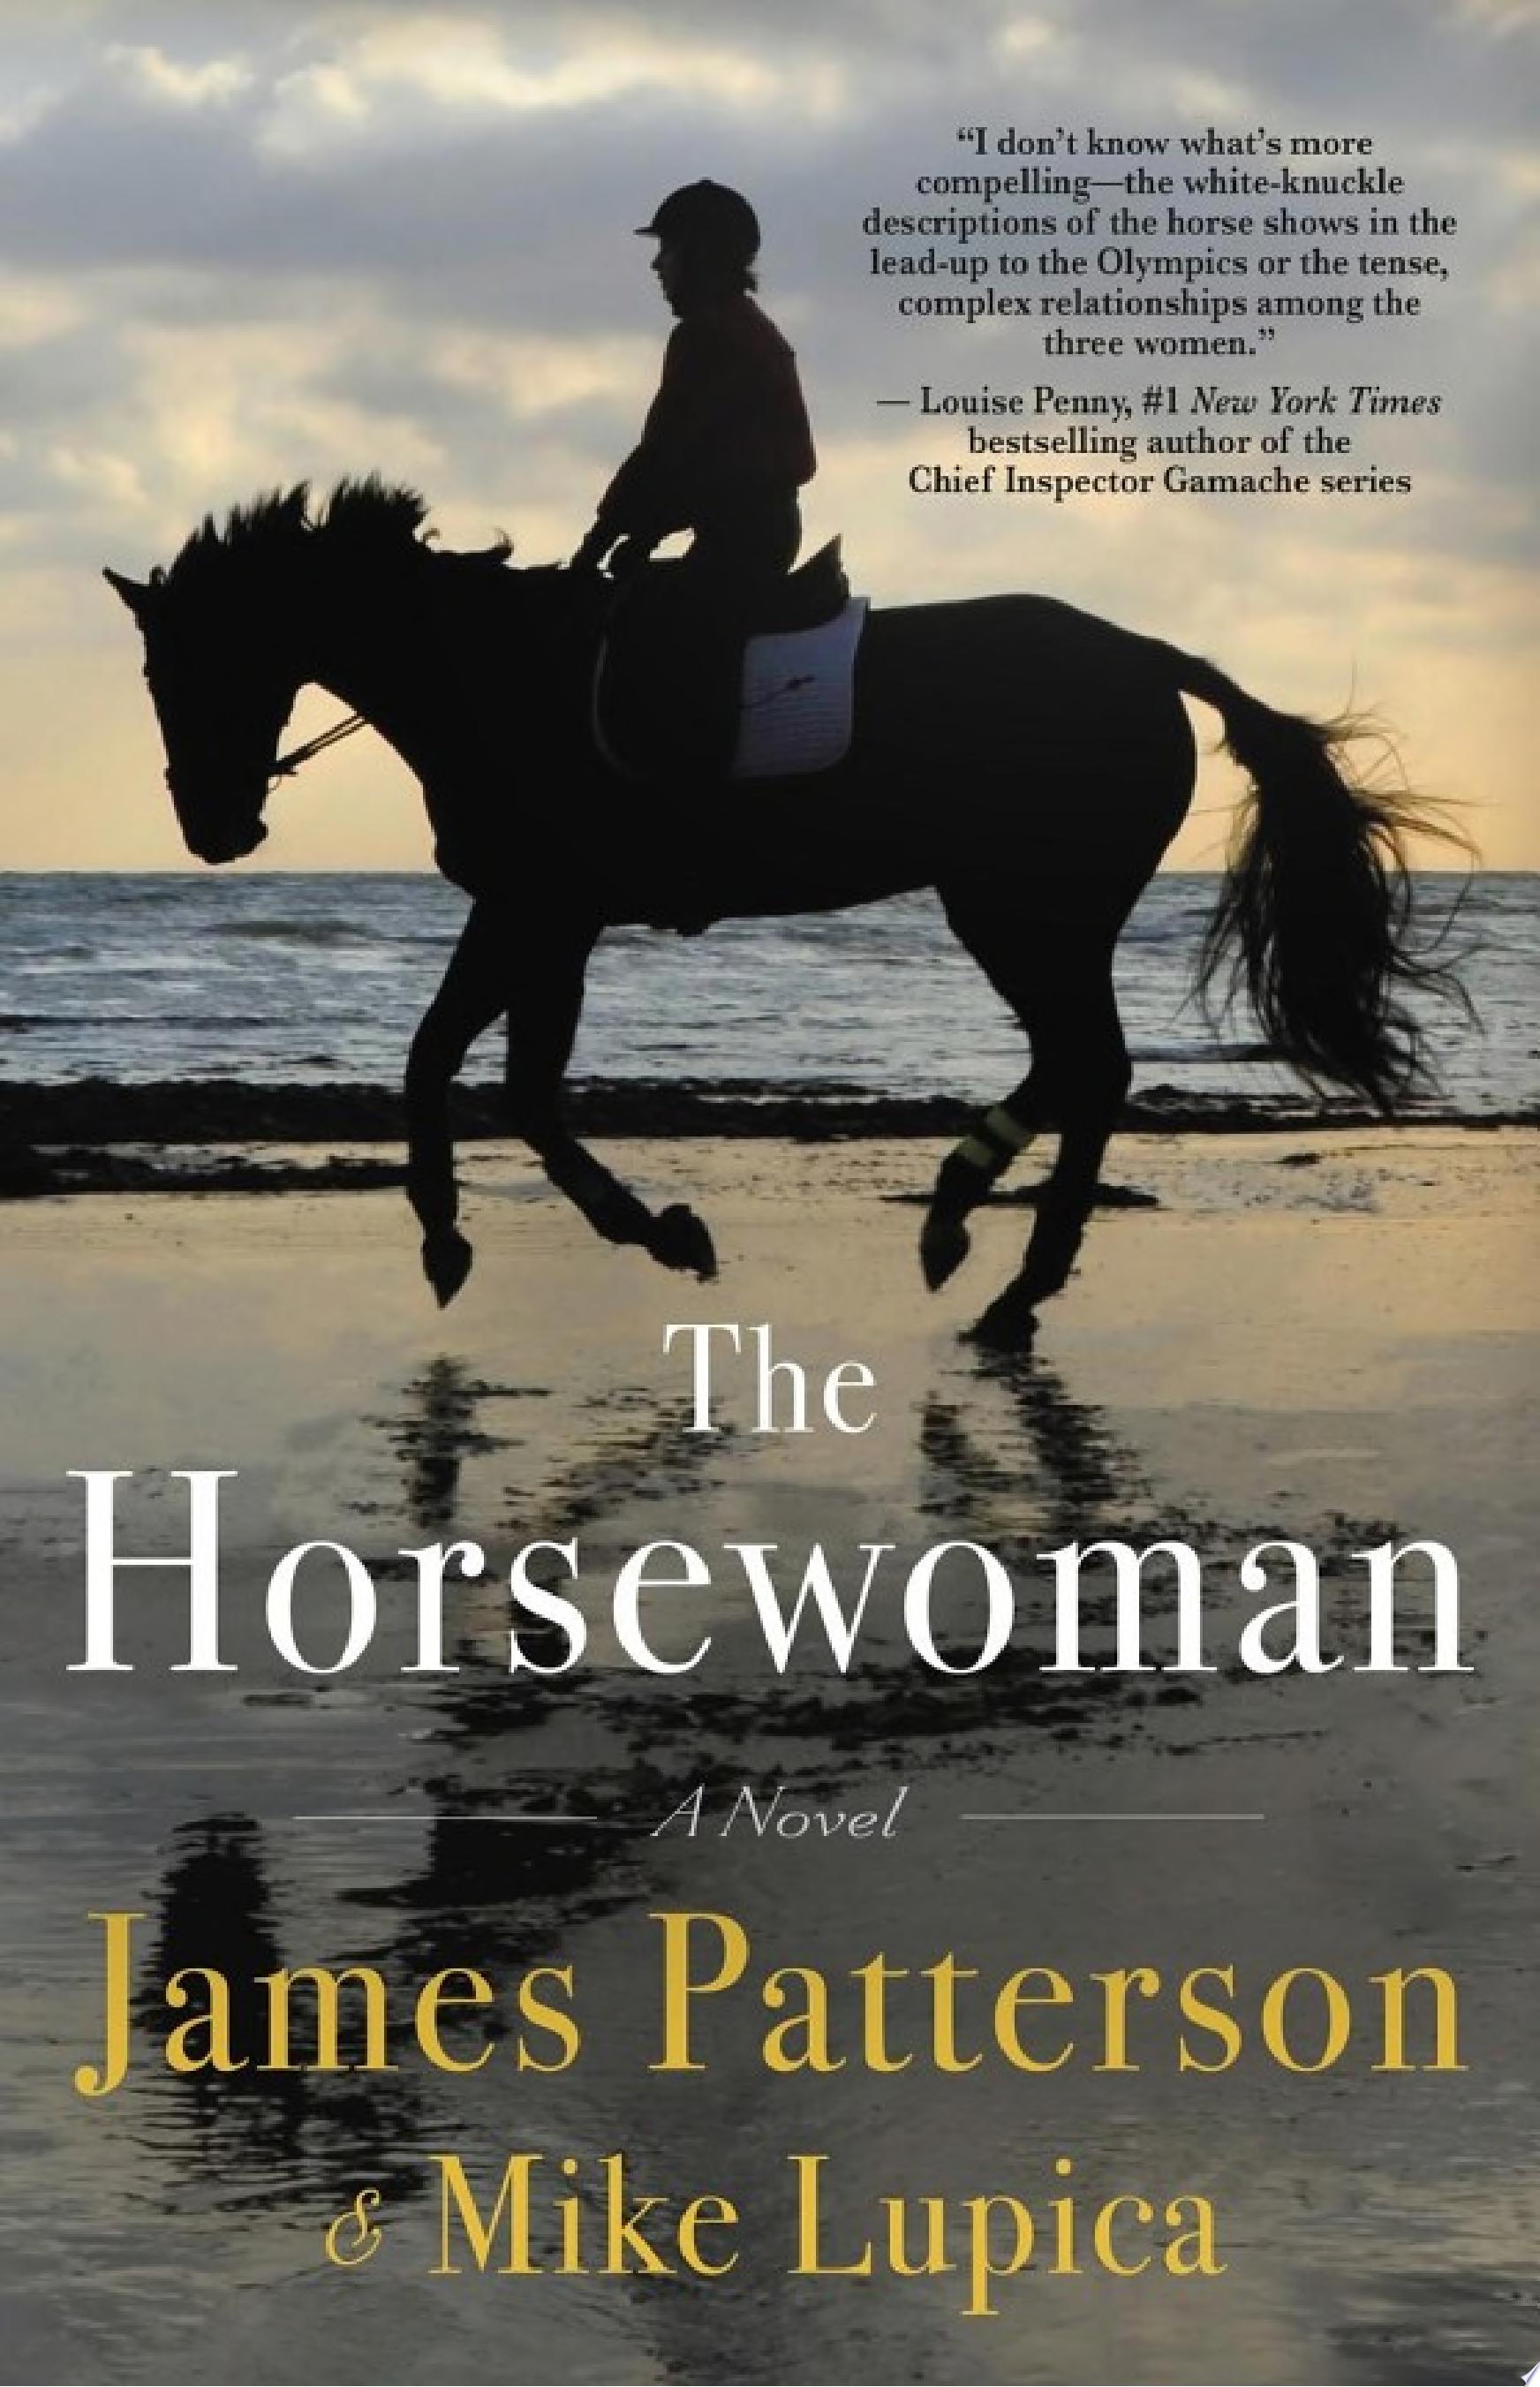 Image for "The Horsewoman"